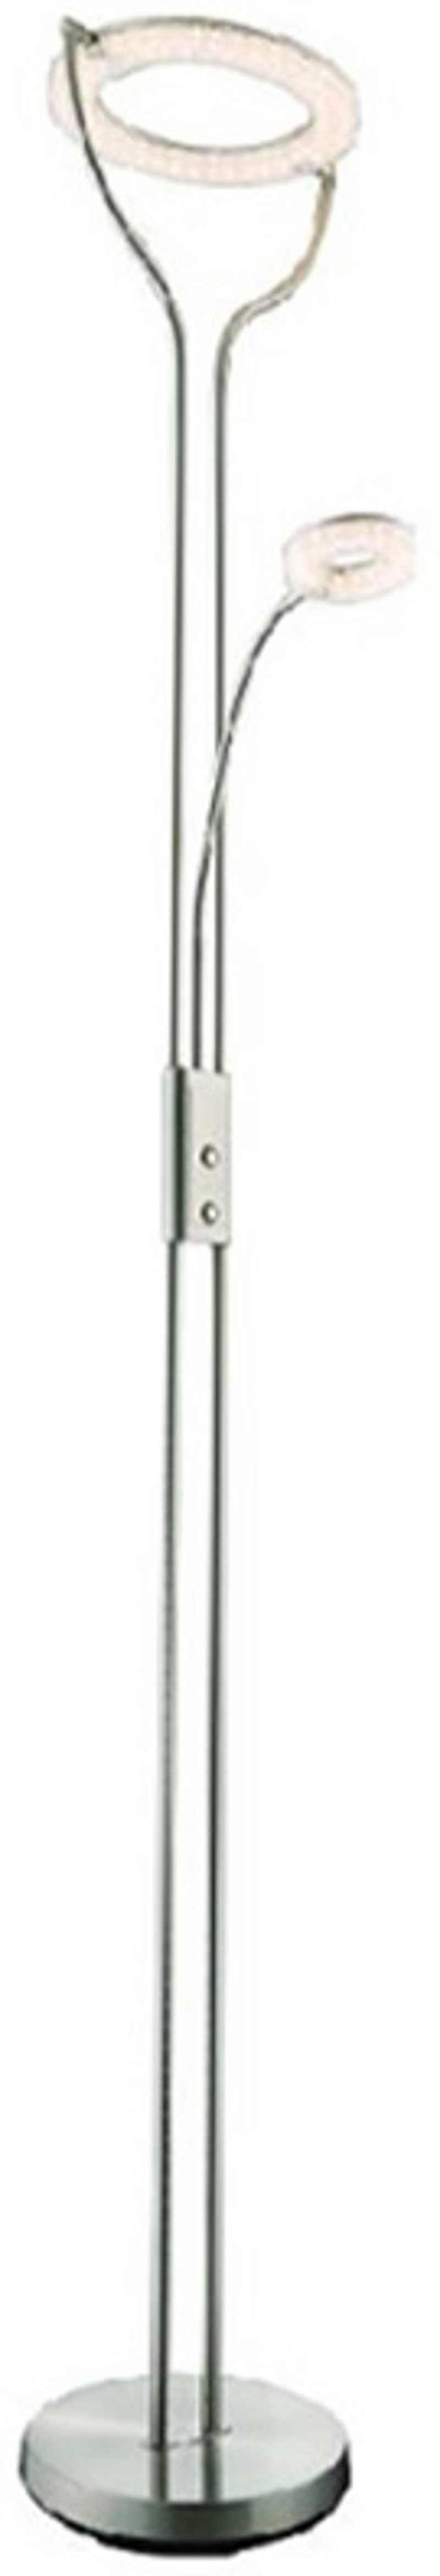 Brushed Nickel Led Torchiere And, Led Torchiere Floor Lamp With Reading Light